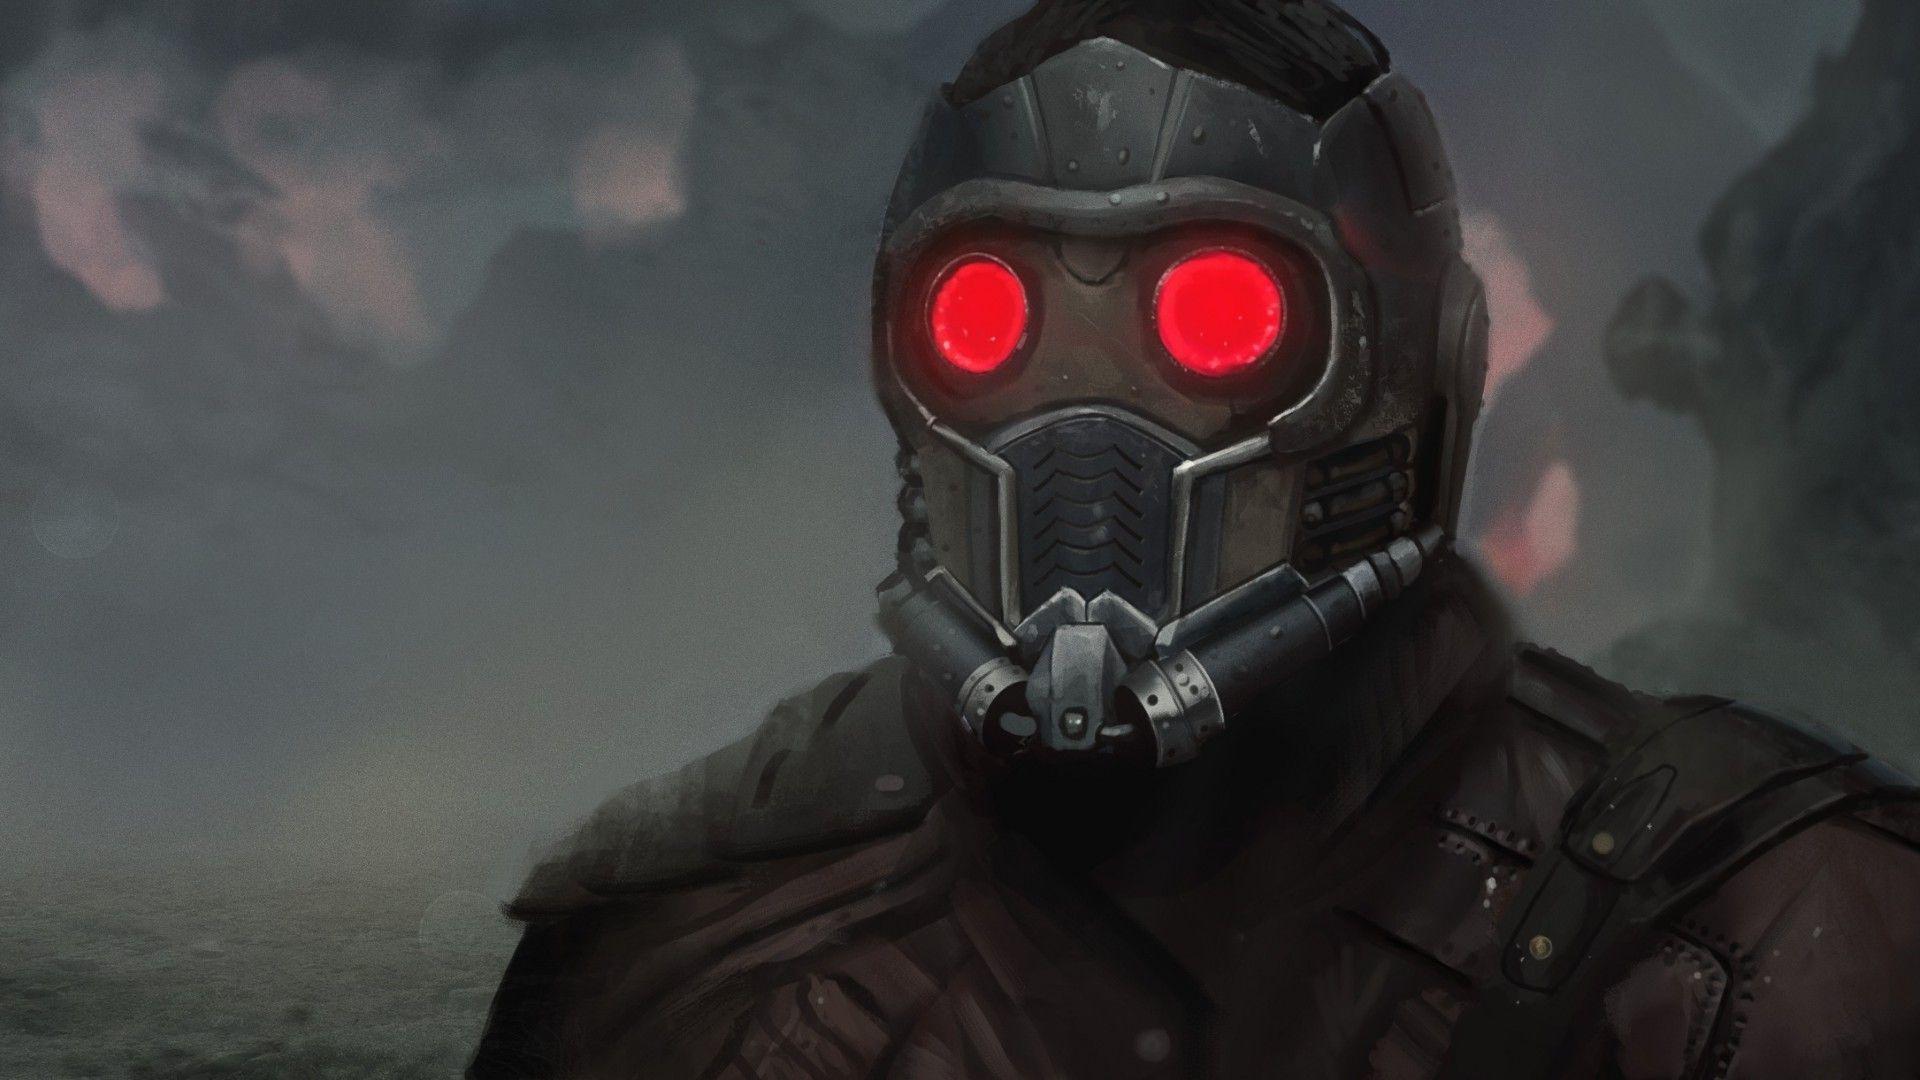 Star Lord Mask Wallpapers